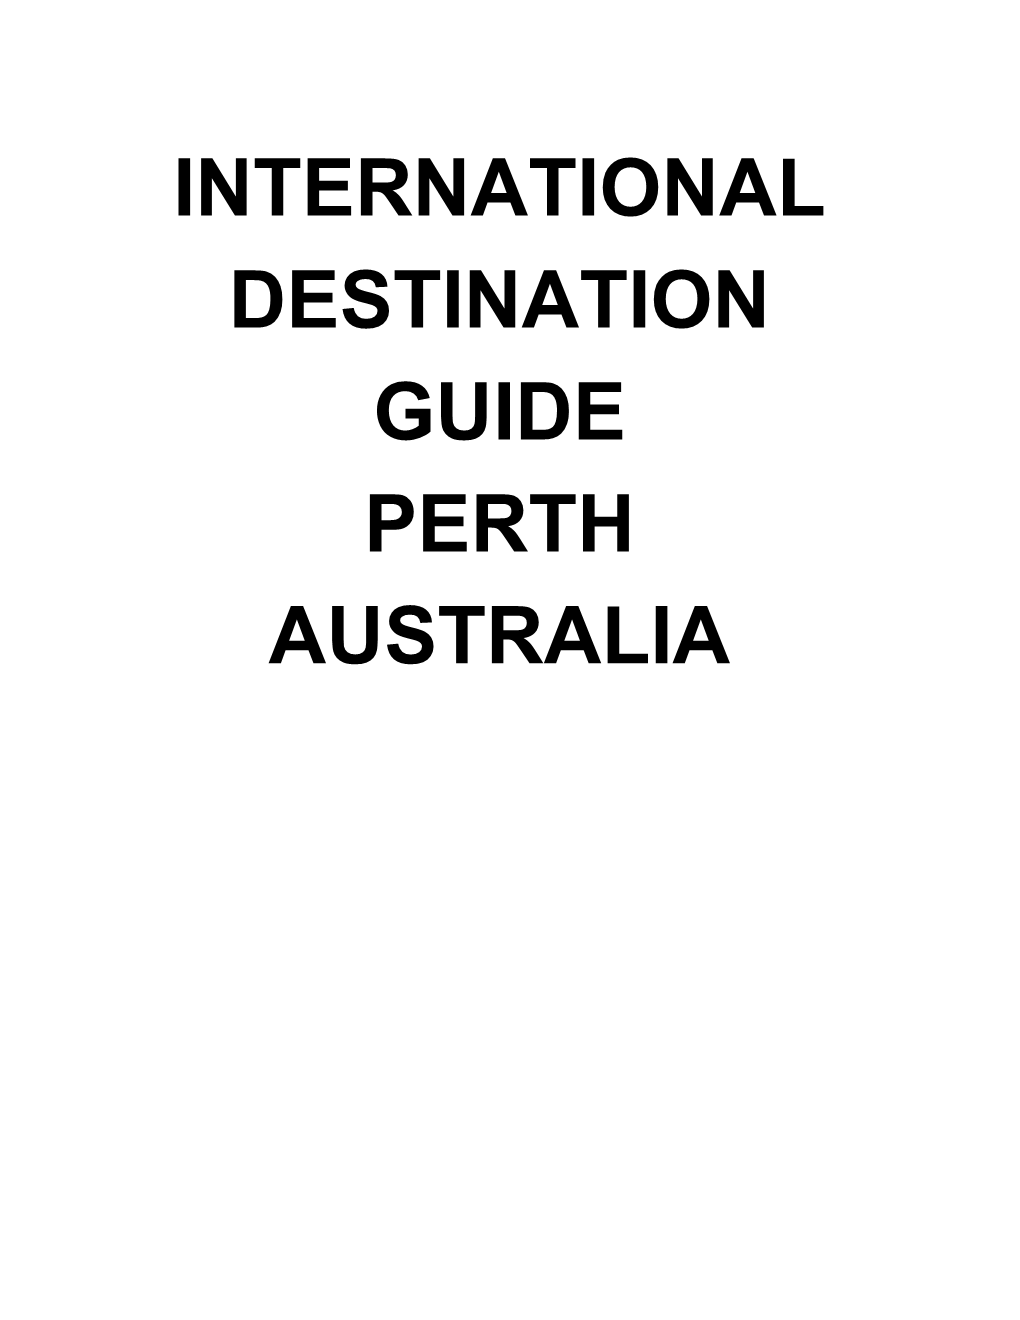 1. Introduction to Perth